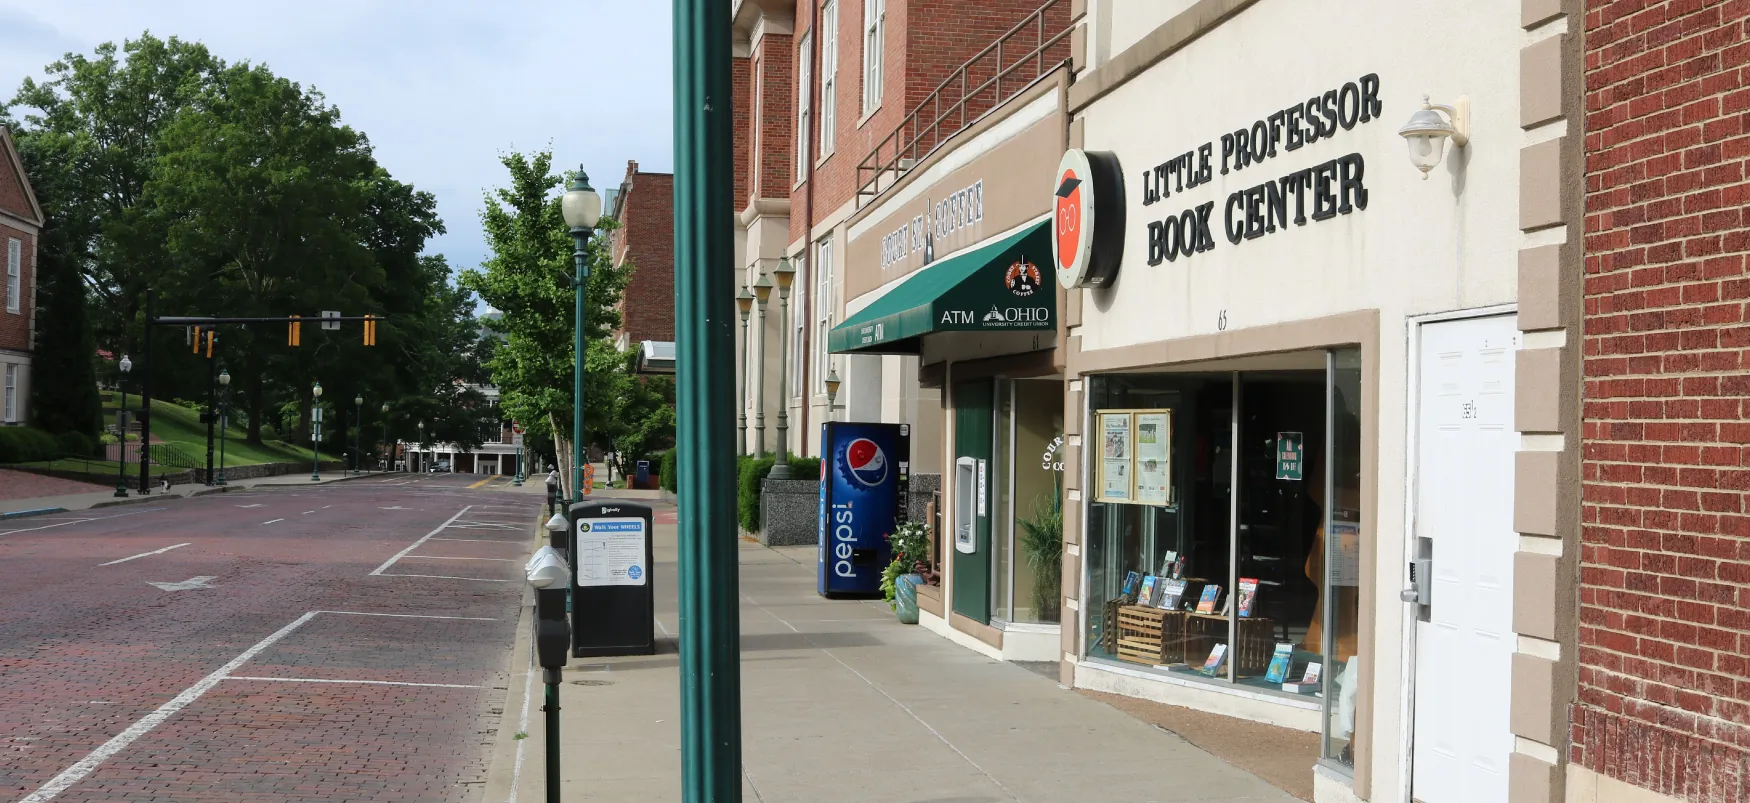 The Little Professor Book Center and another store are visible on the right side of a street. There is a Pepsi machine as well. There are no cars on the street.